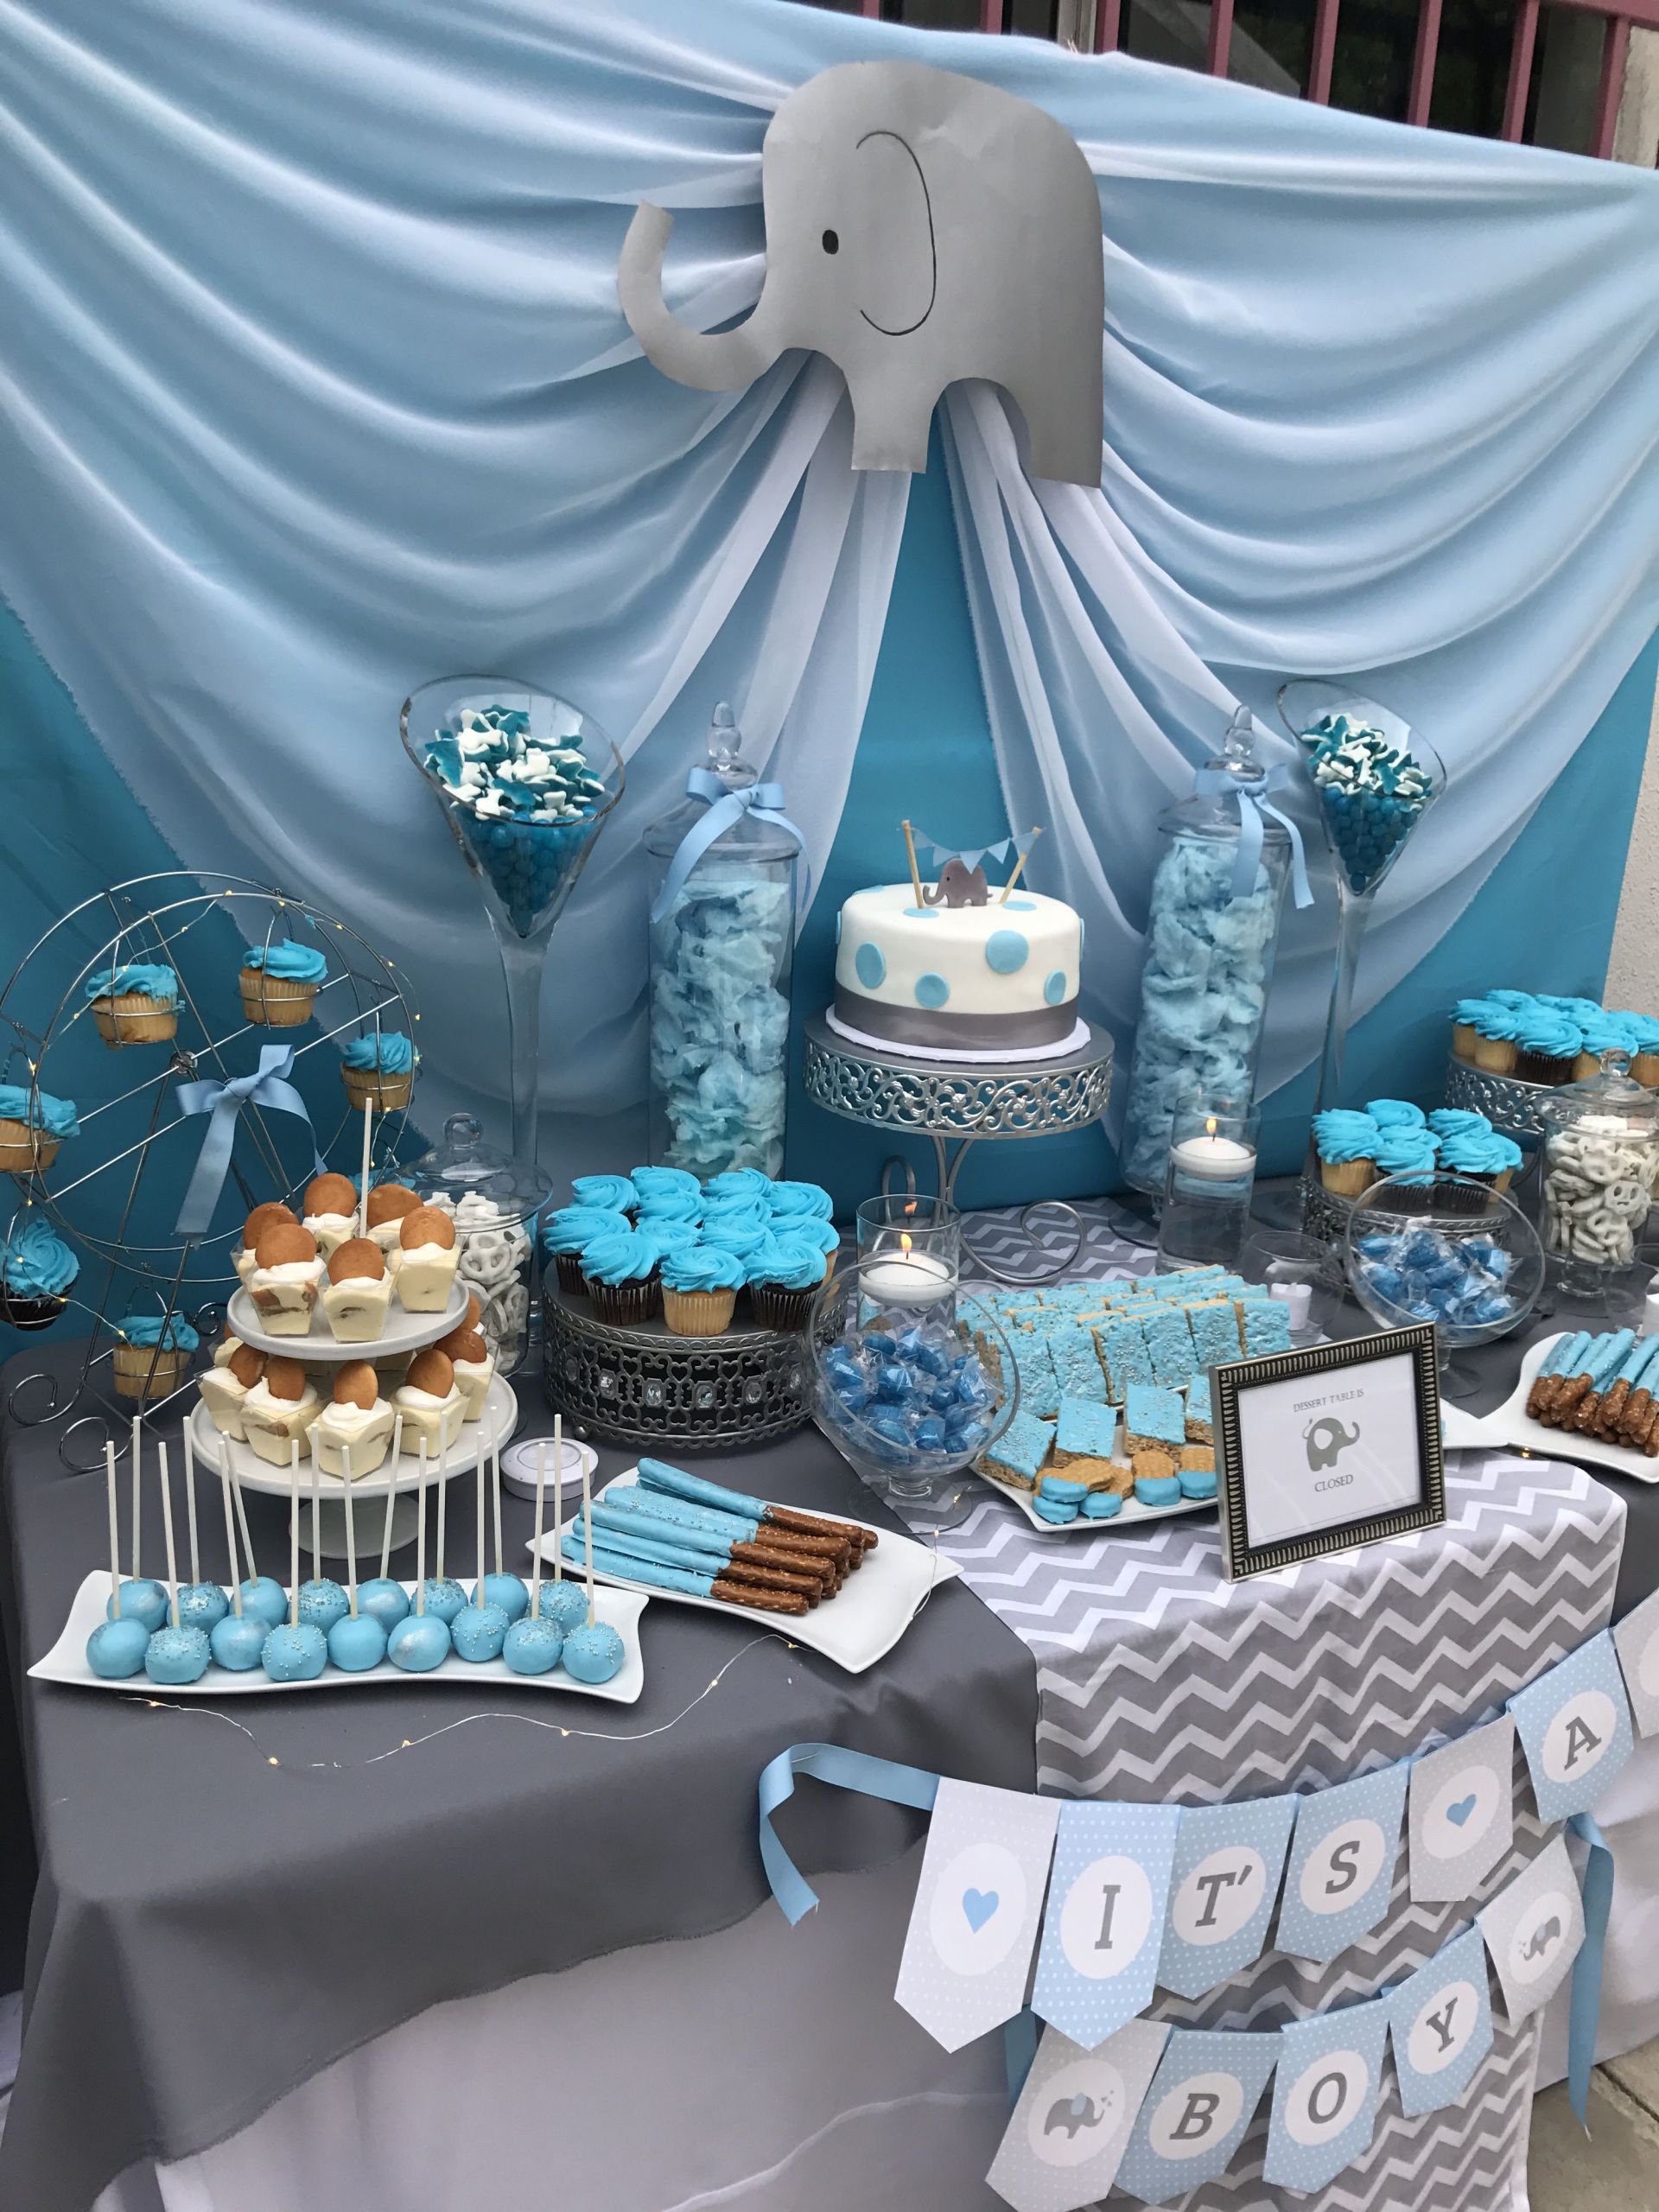 Boy Baby Shower Table Decoration Ideas
 Little peanut babyshower dessert table With images